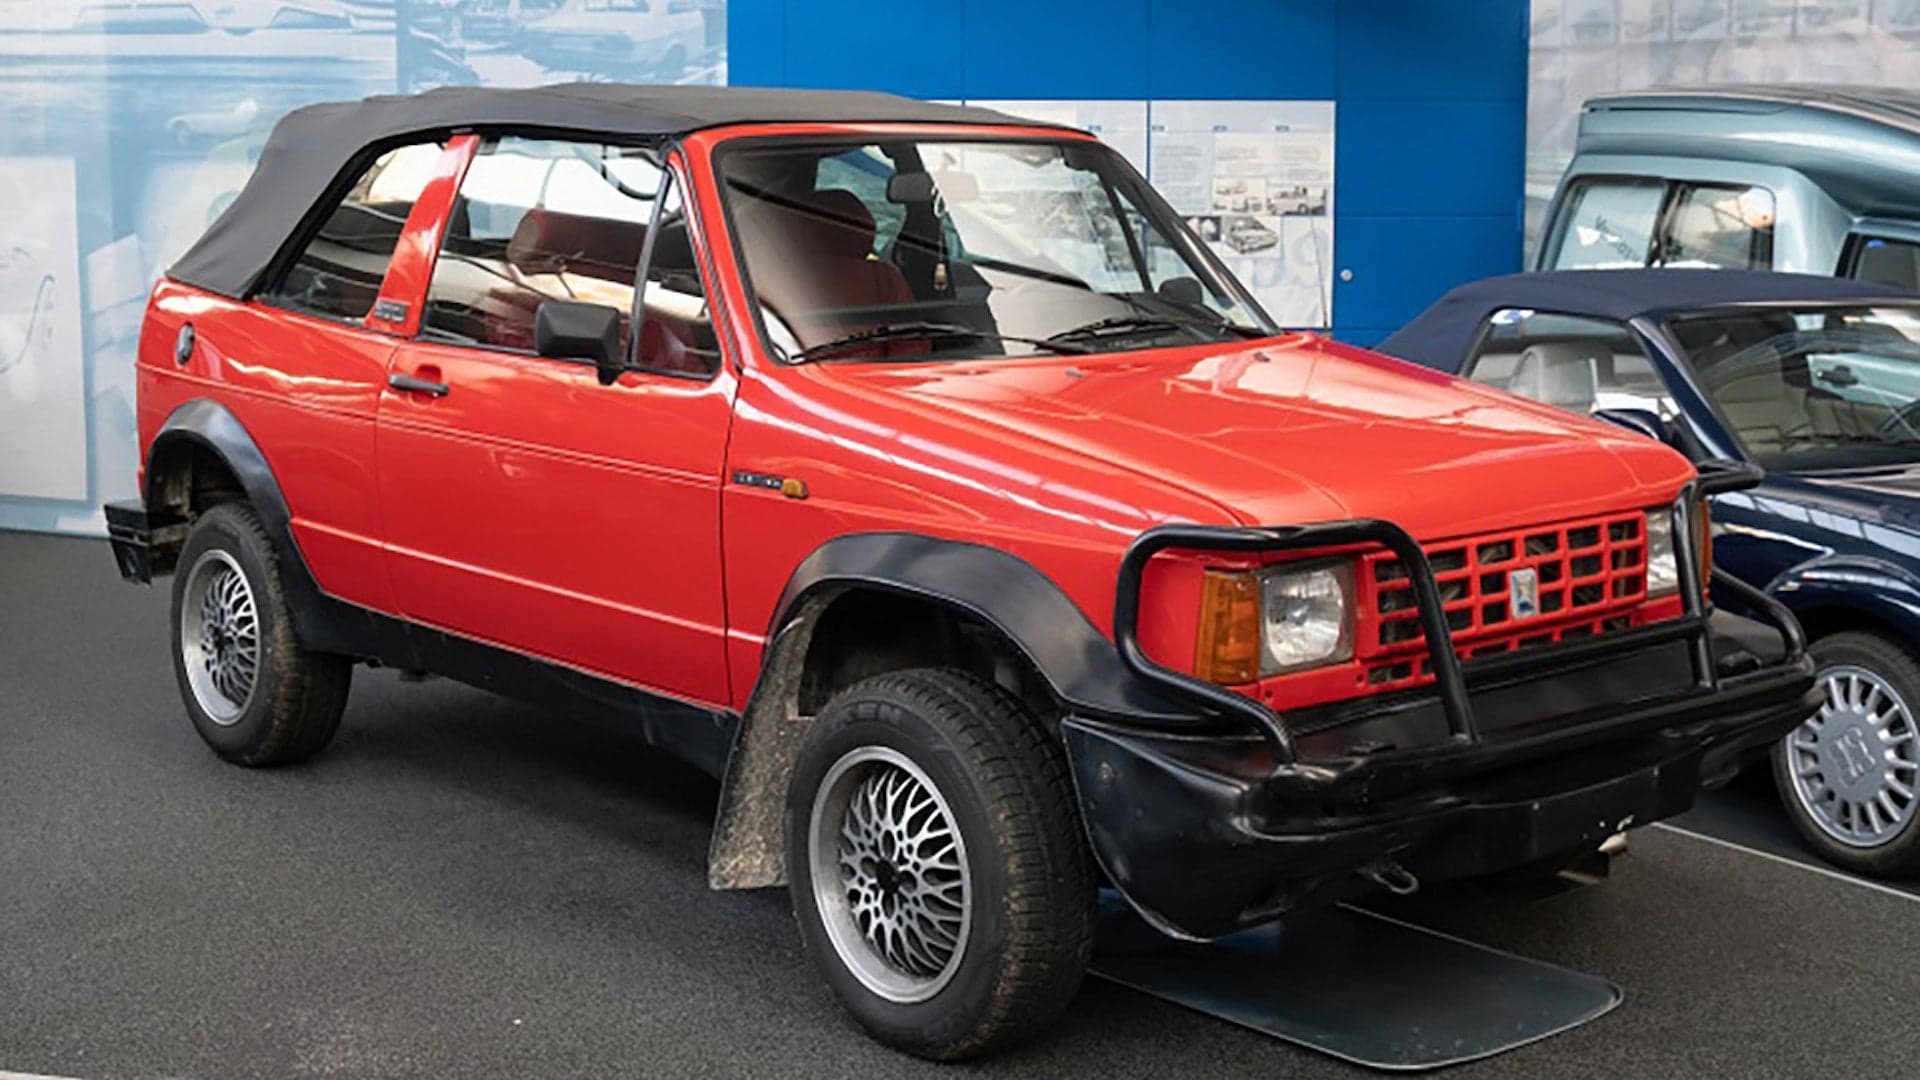 Did You Know There’s a Rare Lifted Convertible MK2 VW Golf Variant?